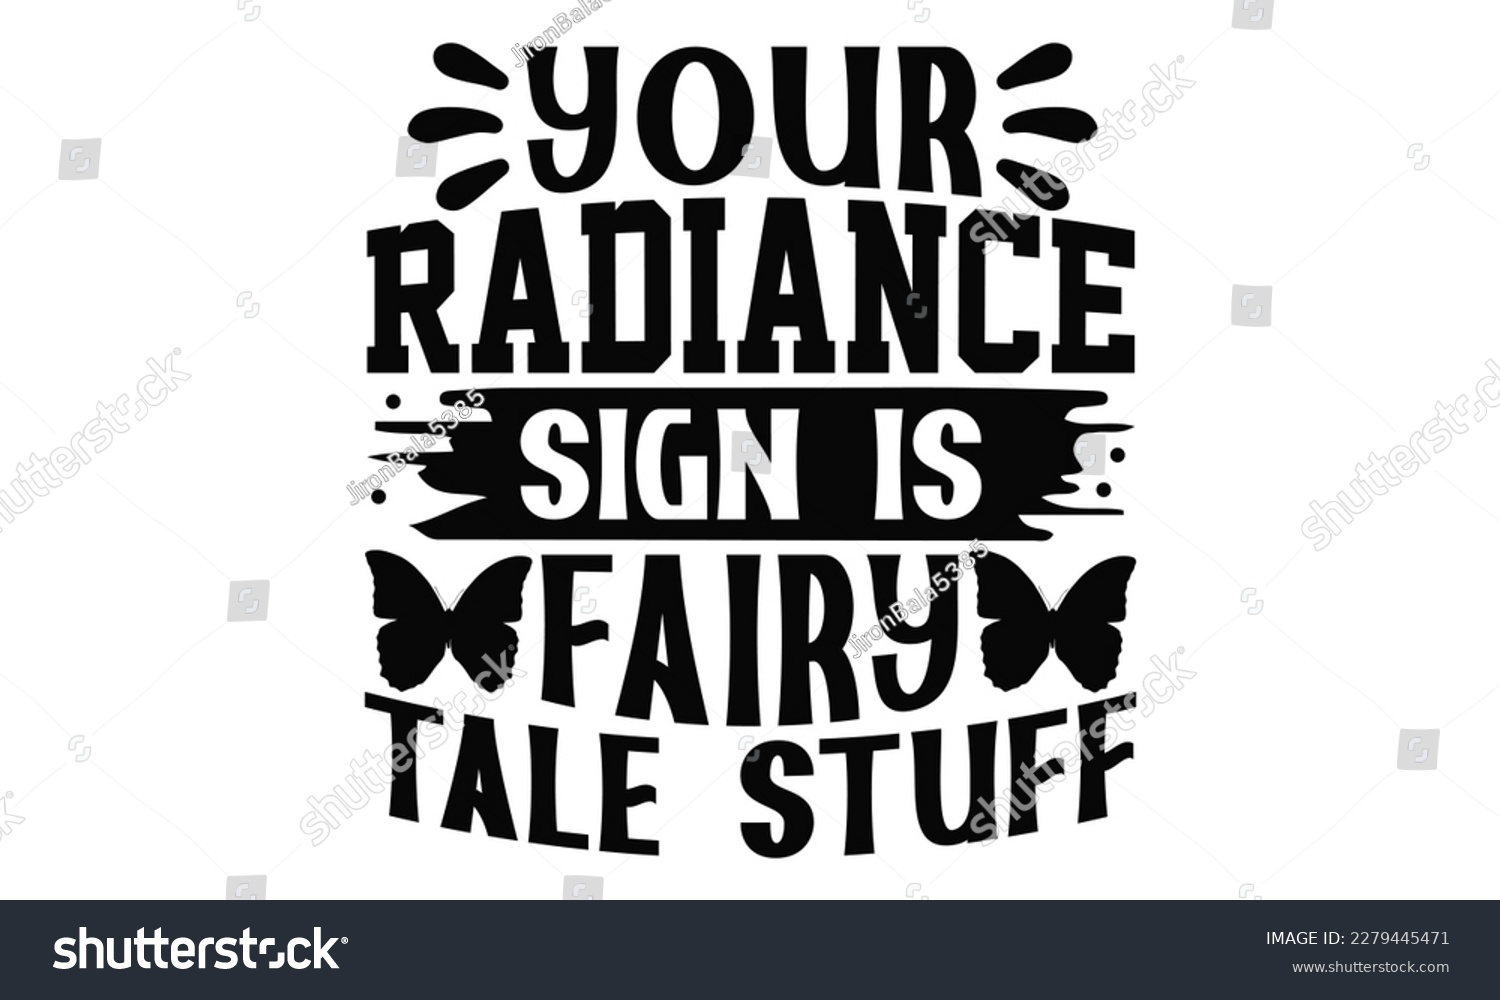 SVG of 
 Your Radiance Sign Is Fairy Tale Stuff - Butterfly SVG Design, Calligraphy graphic design, this illustration can be used as a print on t-shirts, bags, stationary or as a poster. svg